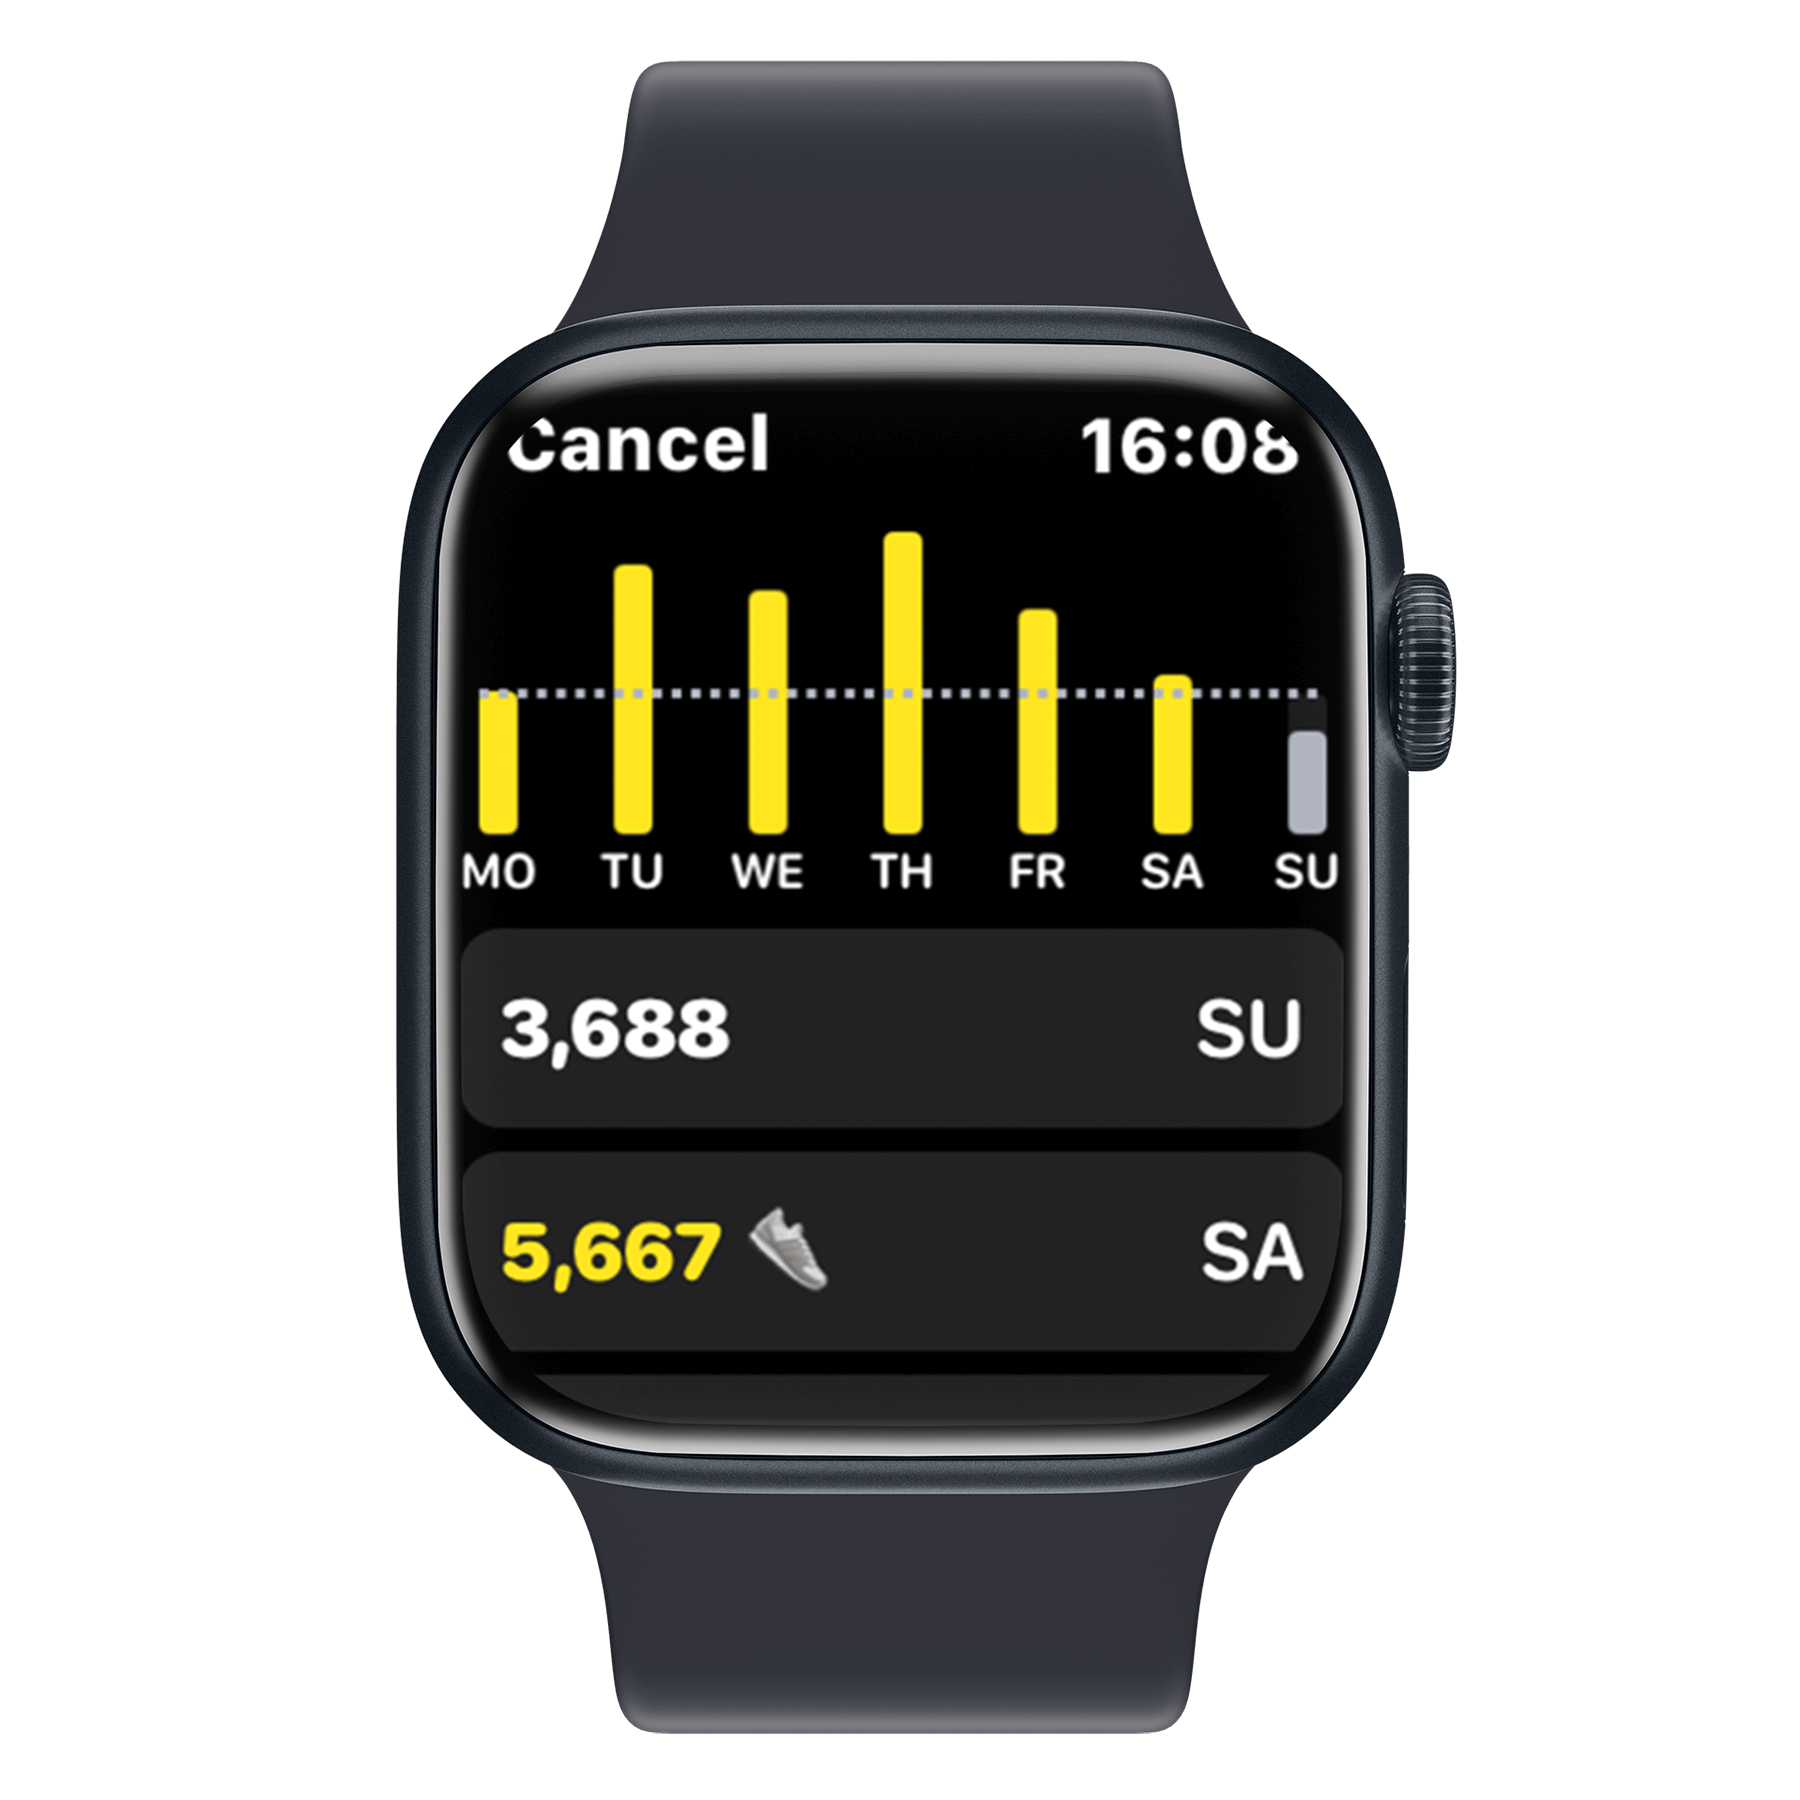 Apple watch showing a screen for reviewing the steps walked on each of the preview seven days.